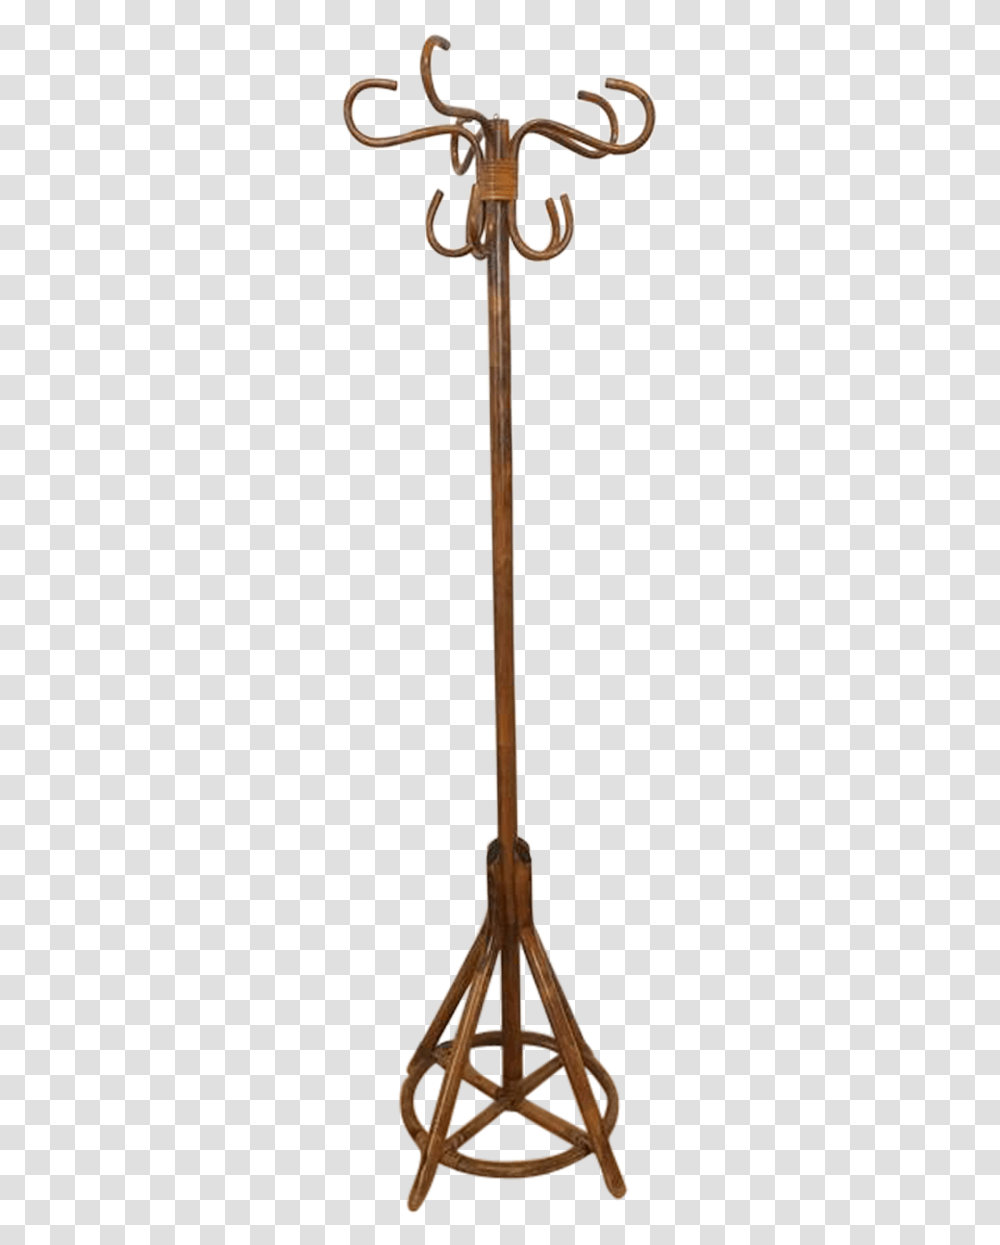 Thumb Image Coat Hanger Stand In, Sword, Weapon, Stick, Cane Transparent Png